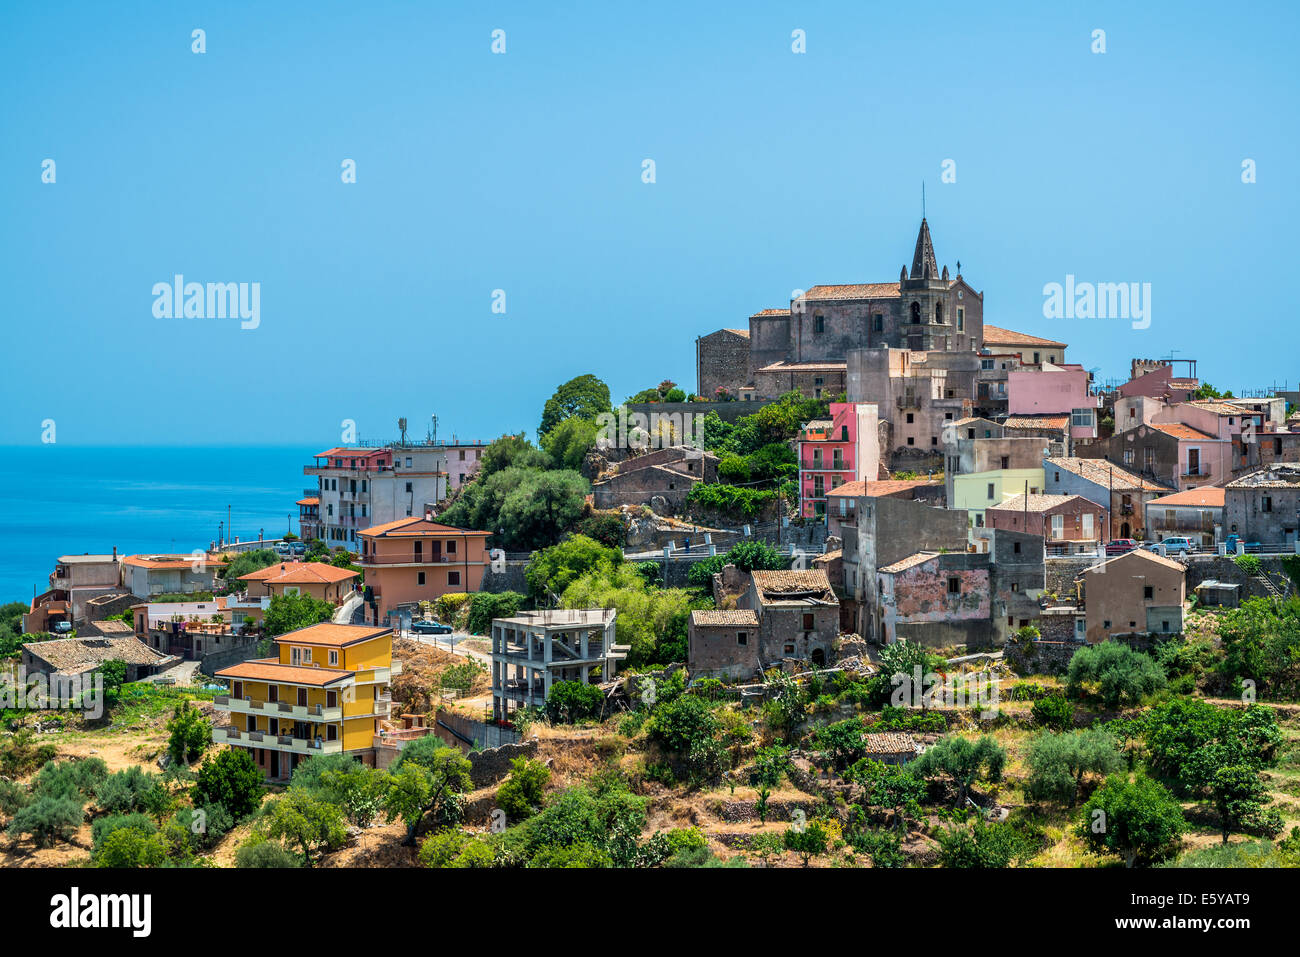 View of a small village of Forza d'Agro, Sicily Stock Photo - Alamy